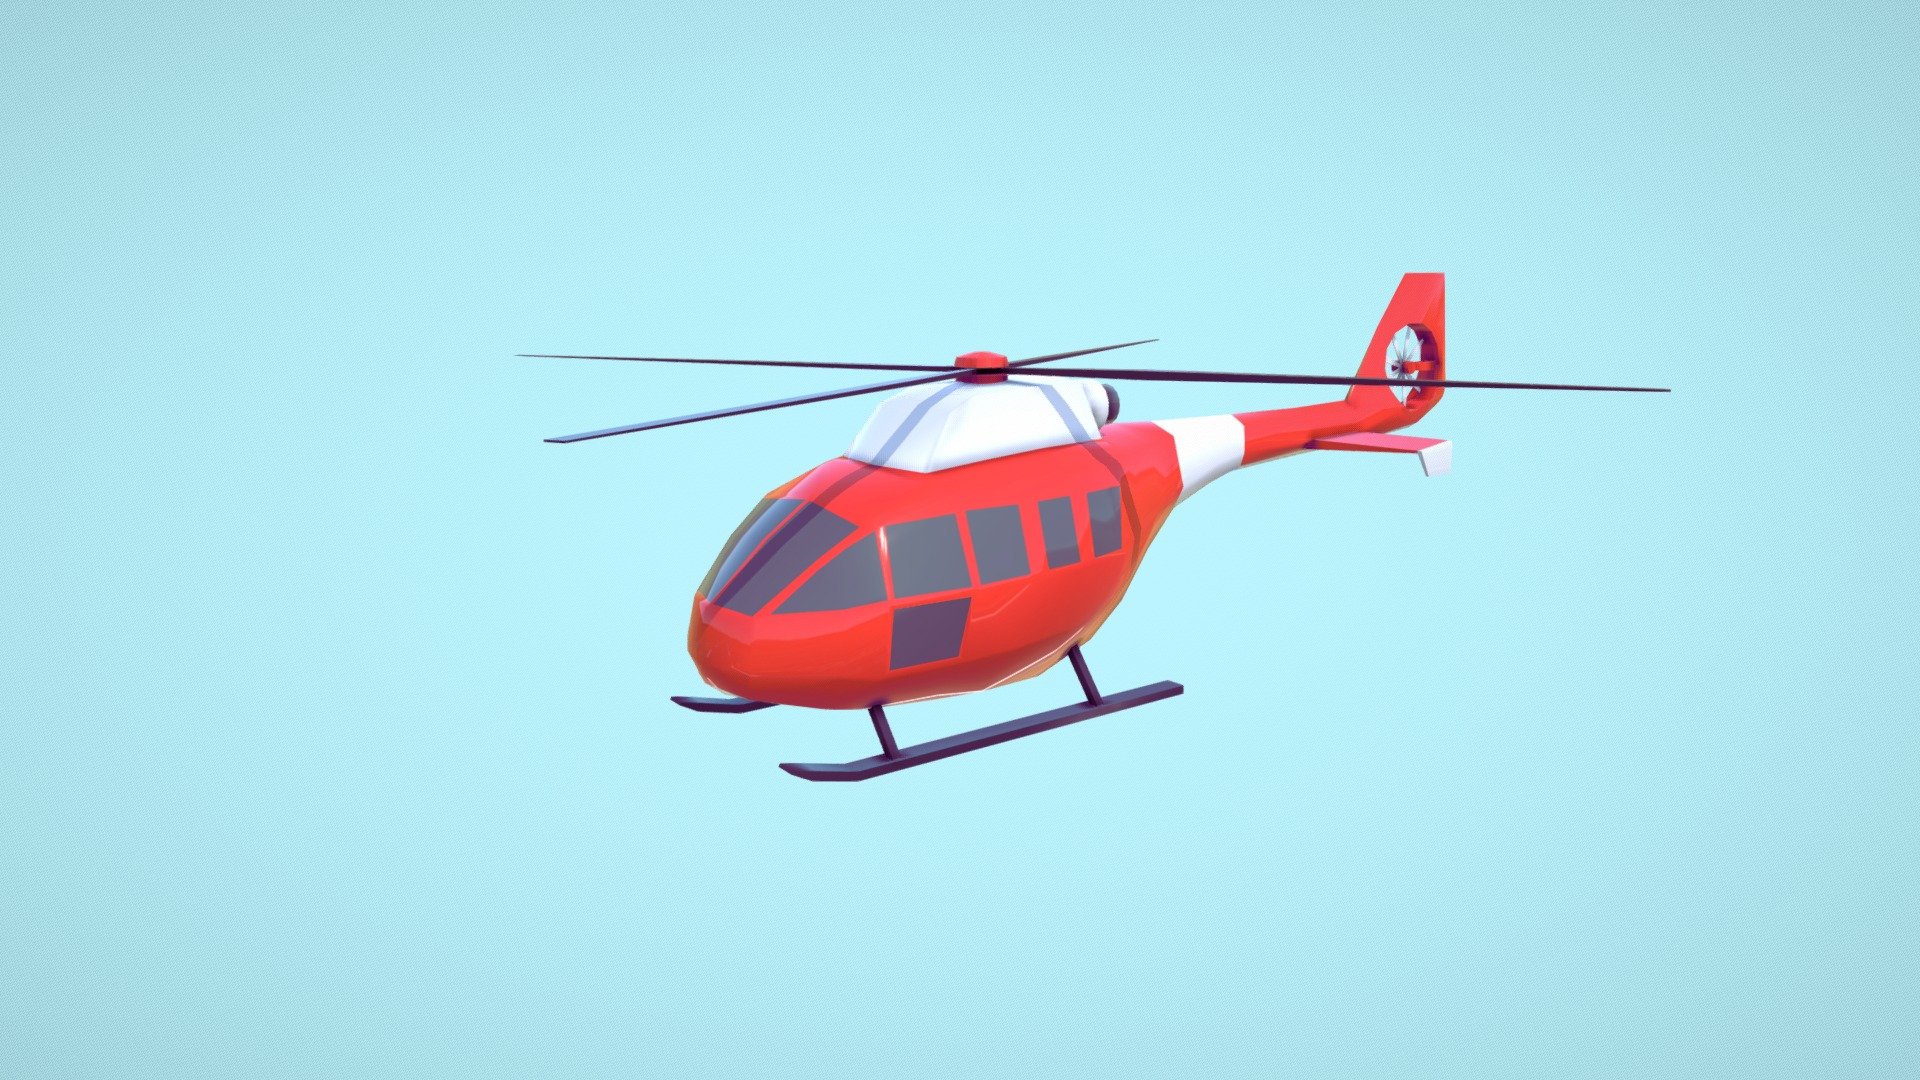 Cartoon Low Poly Helicopter 3d model.

Created on Cinema 4d R17

UVW Textured

Game Ready

Fast and simple
 - Low Poly Helicopter - Download Free 3D model by antonmoek 3d model